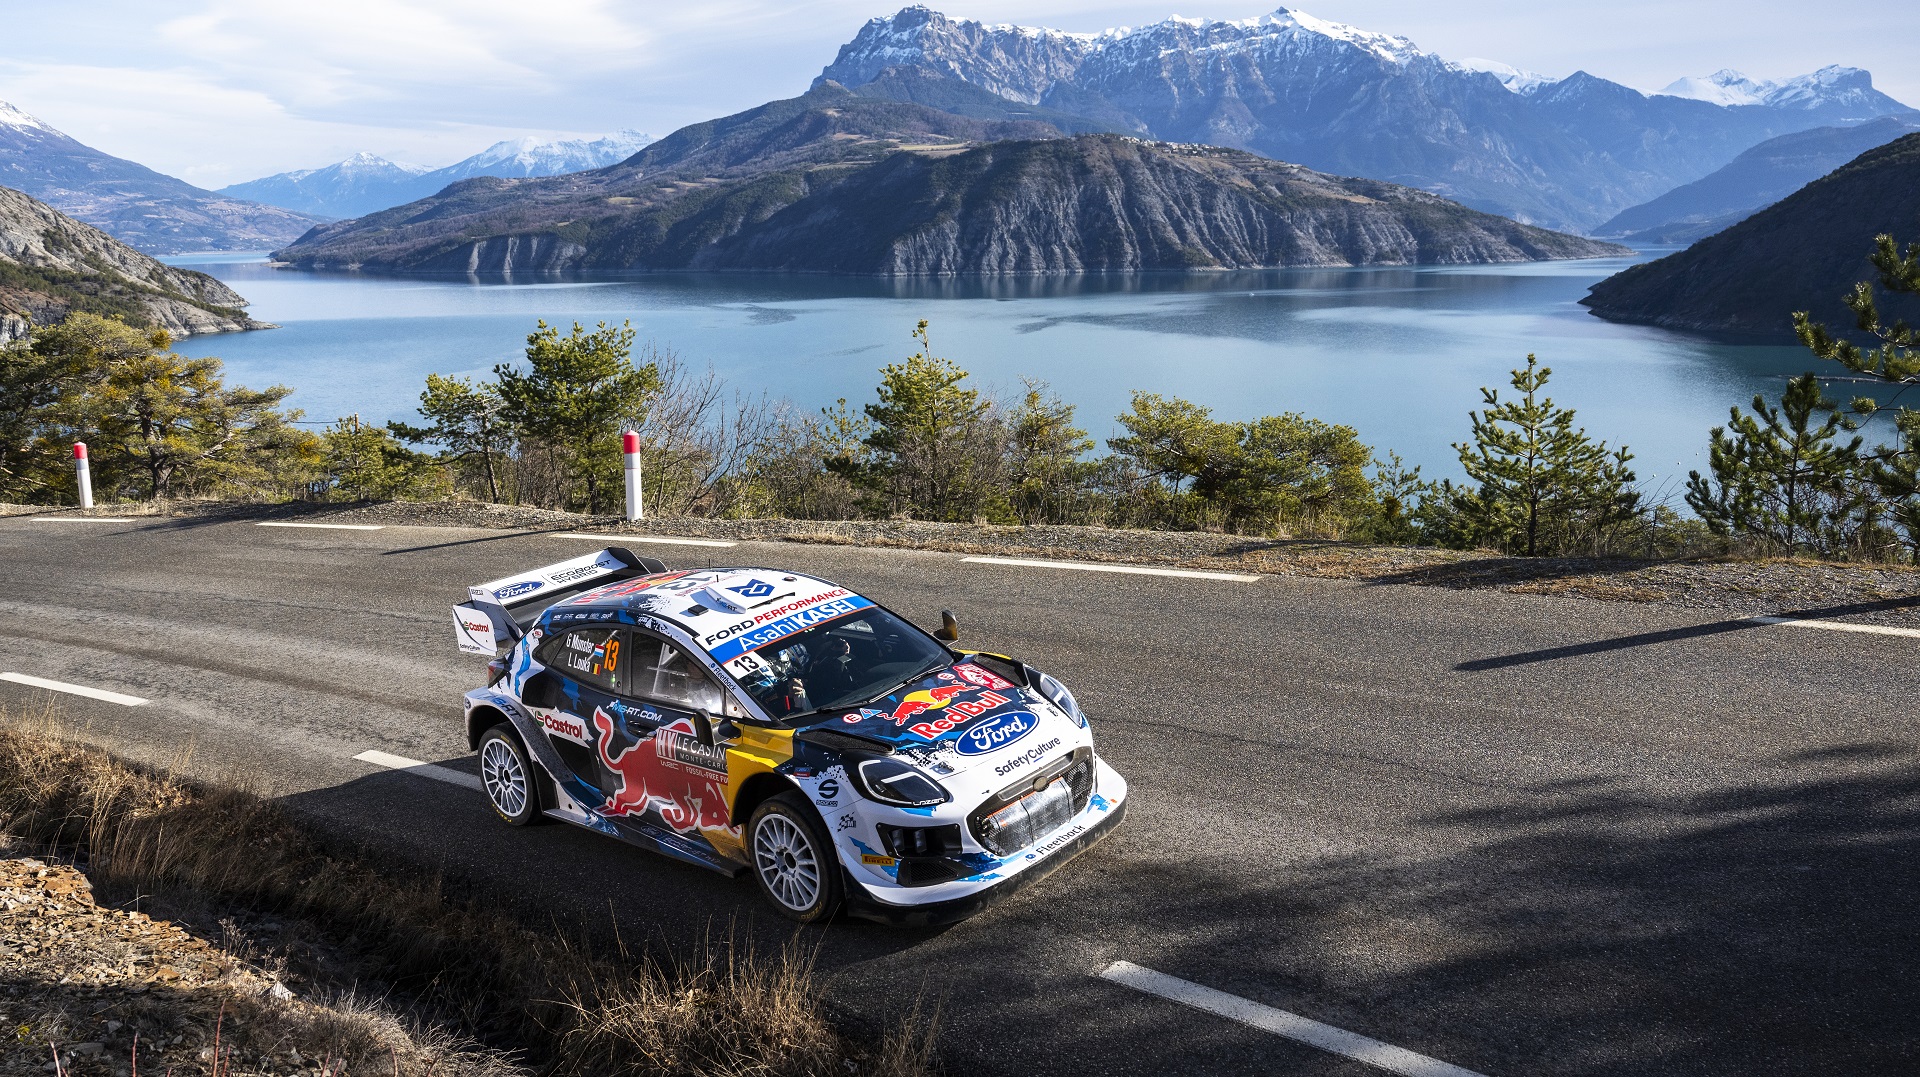 Munster Grégoire (NDL), Louka Louis (BEL) are seen on roadsection during the World Rally Championship Monte-Carlo in Gap, France on 26.January.2024 // Jaanus Ree / Red Bull Content Pool // SI202401260431 // Usage for editorial use only //